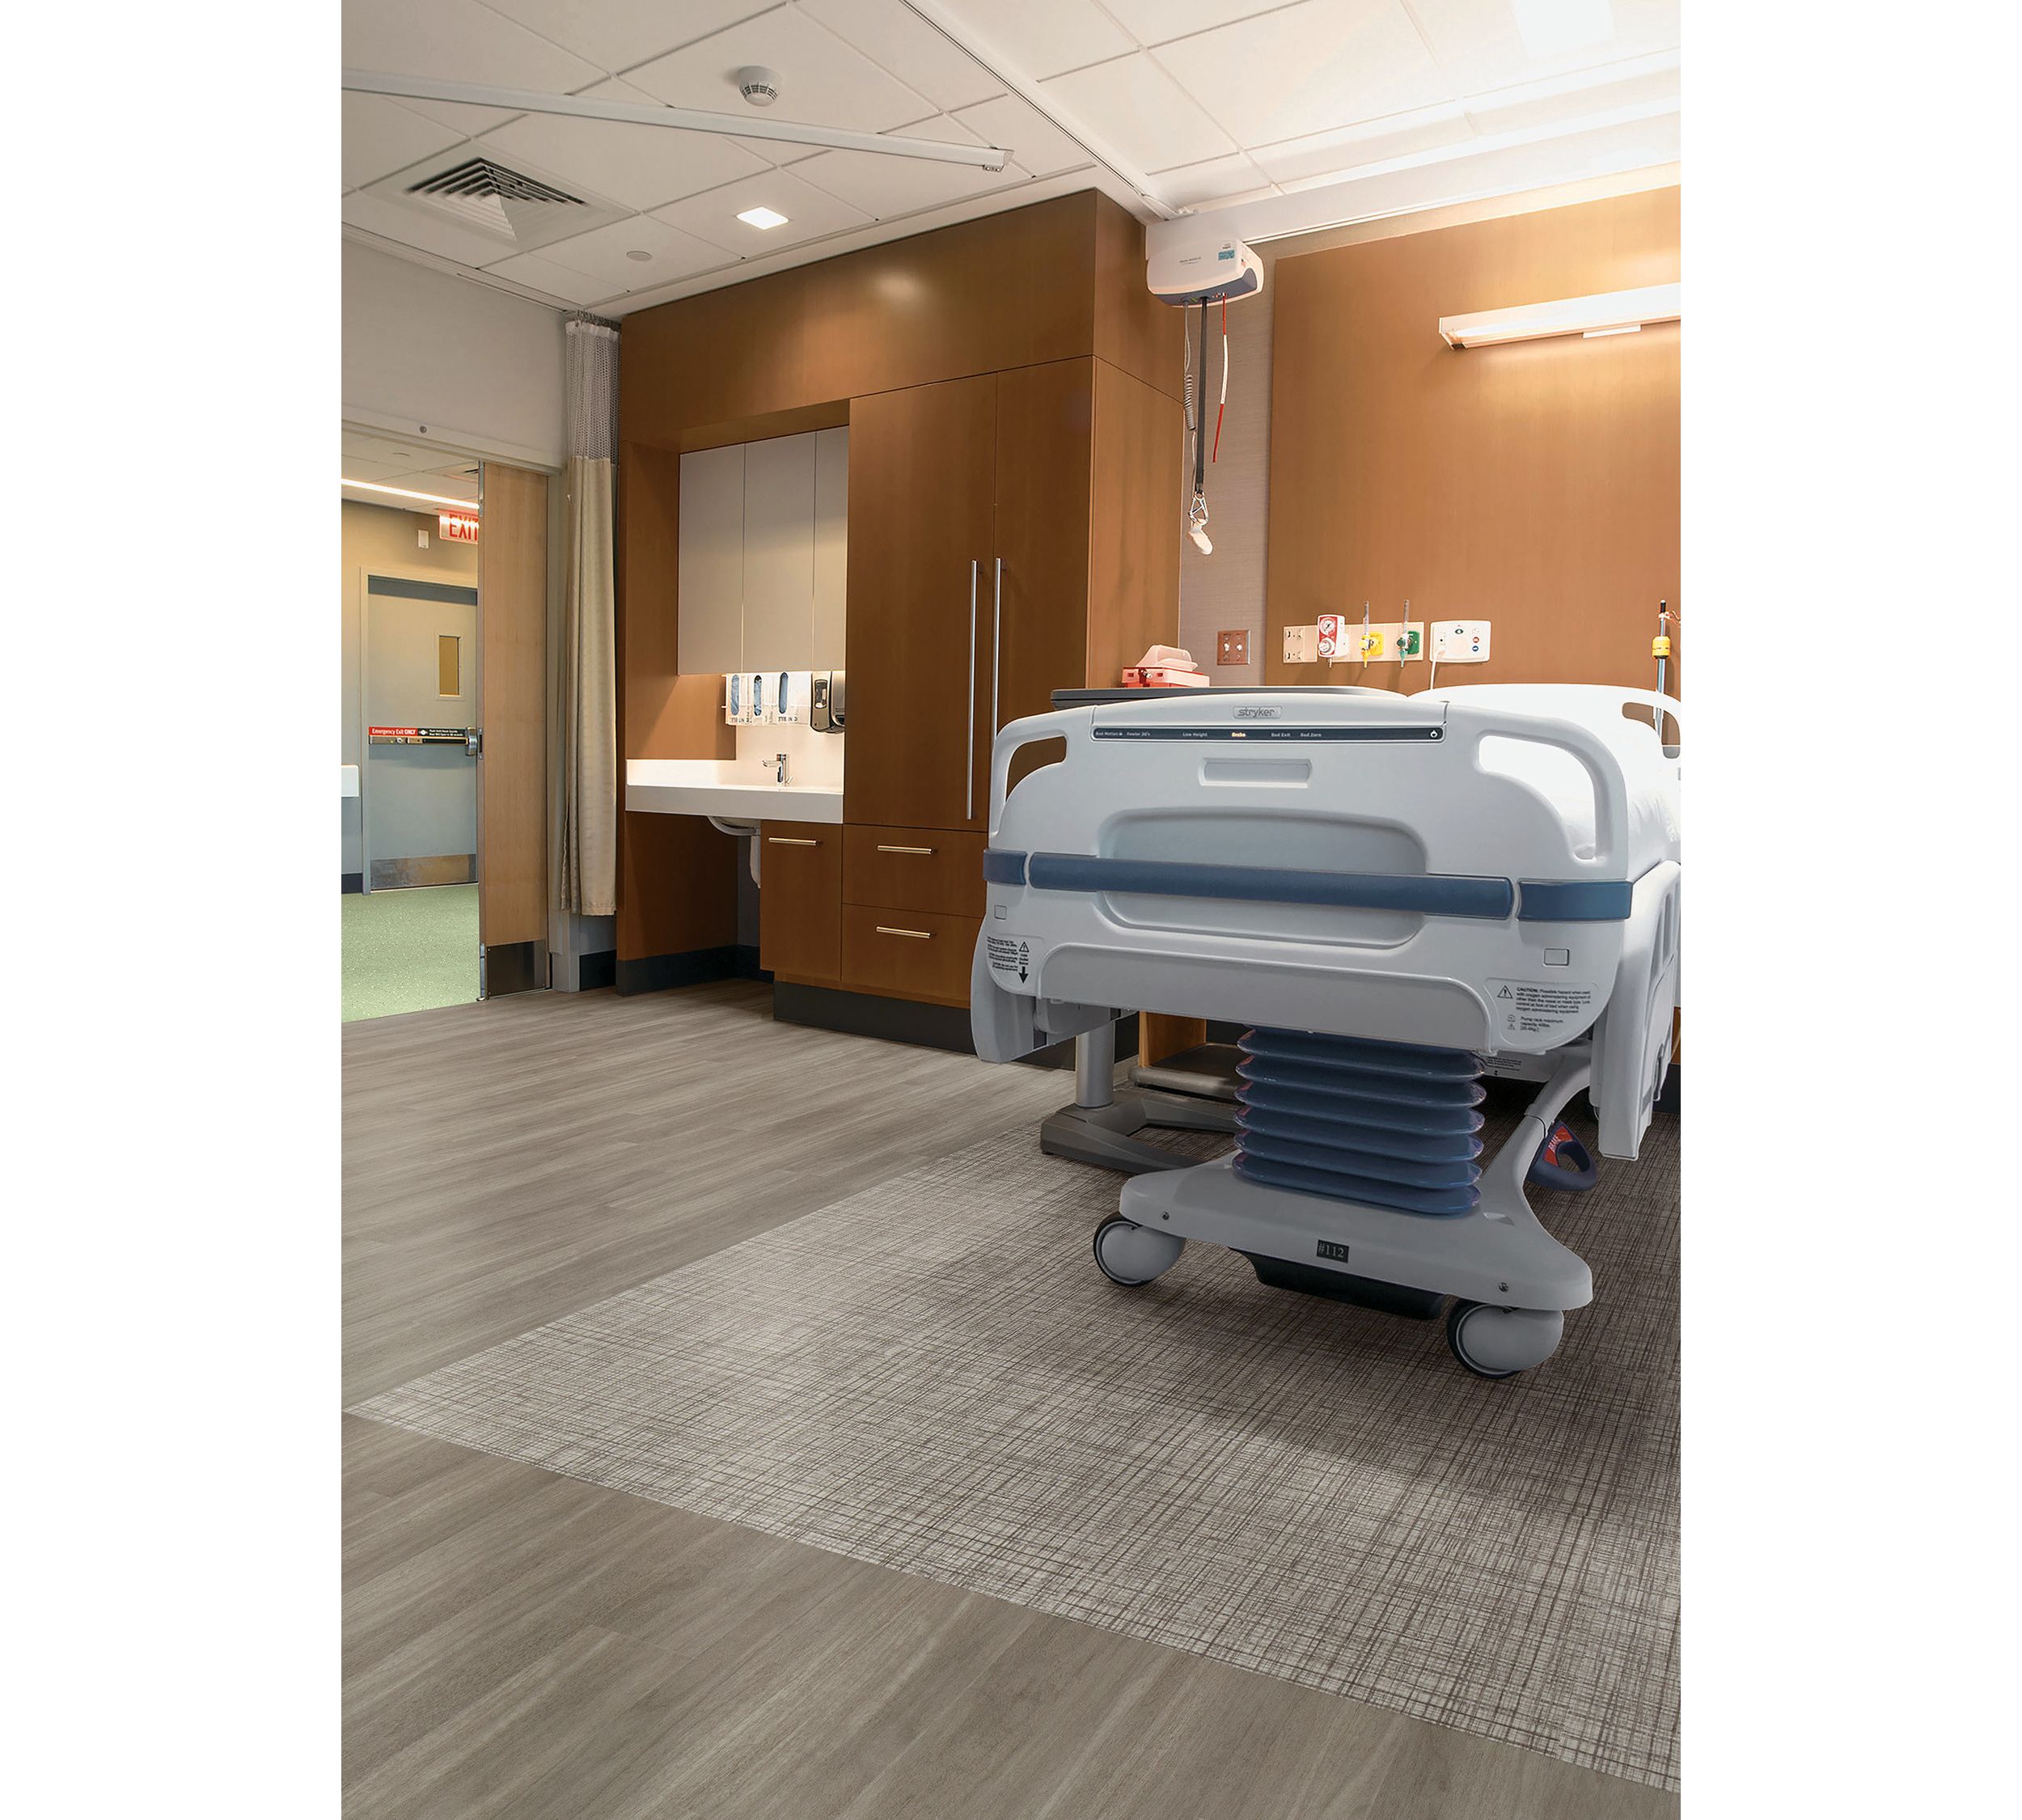 Interface Criterion Classic Woodgrains and Criterion Classic Wovens LVT in patient room with hospital bed  afbeeldingnummer 3